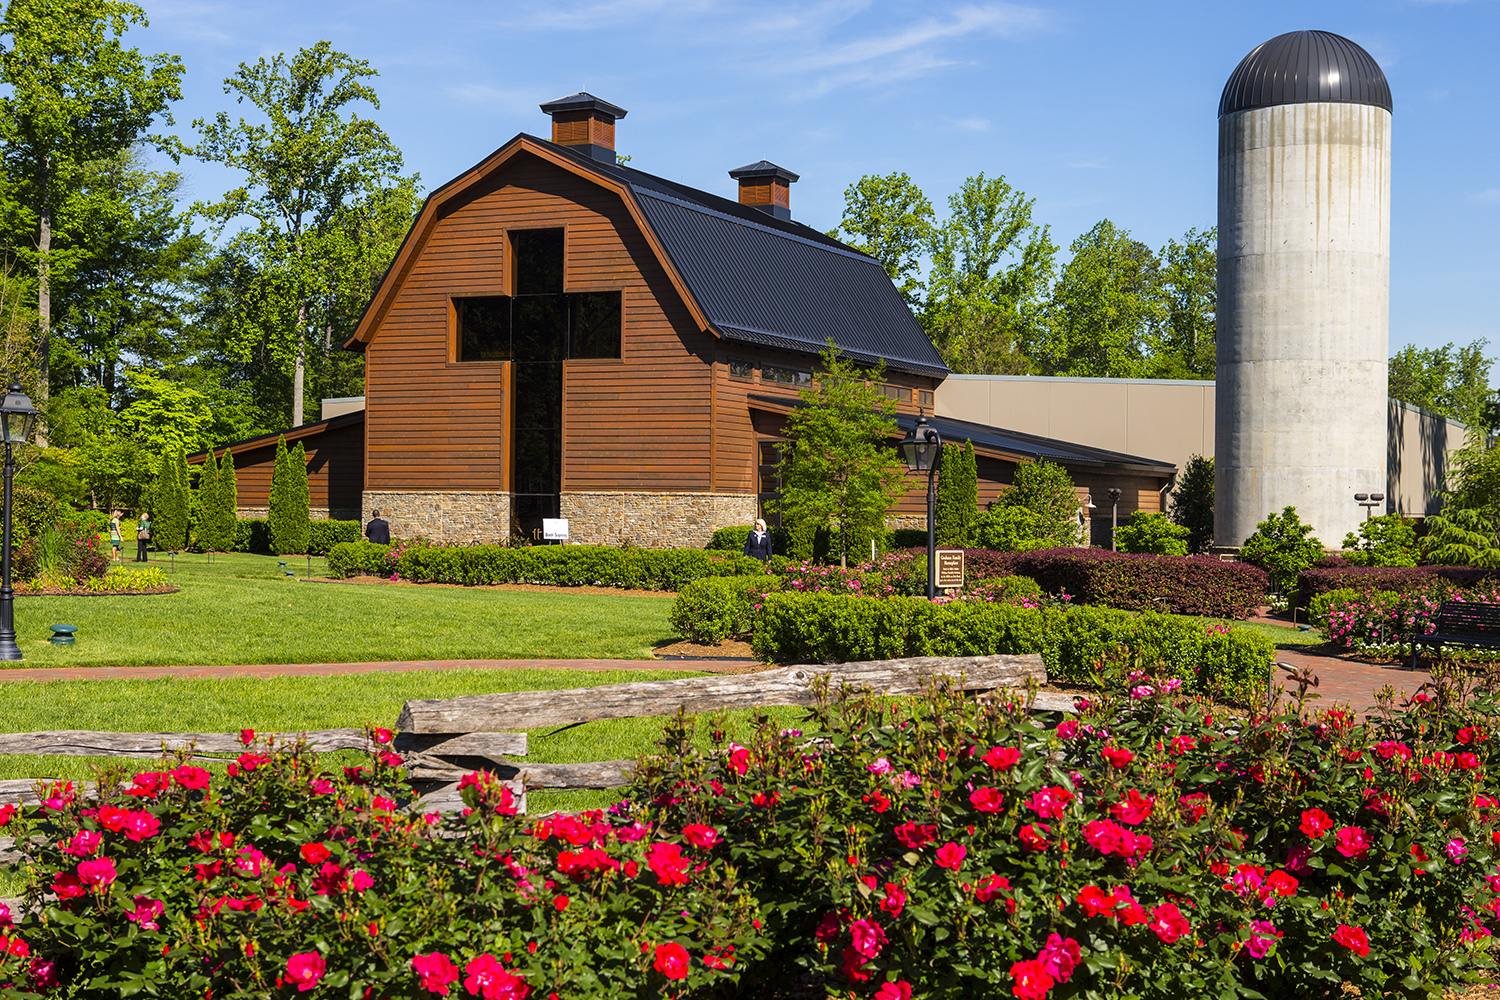 Billy Graham Library is one of the most famous religious attractions in the U.S.